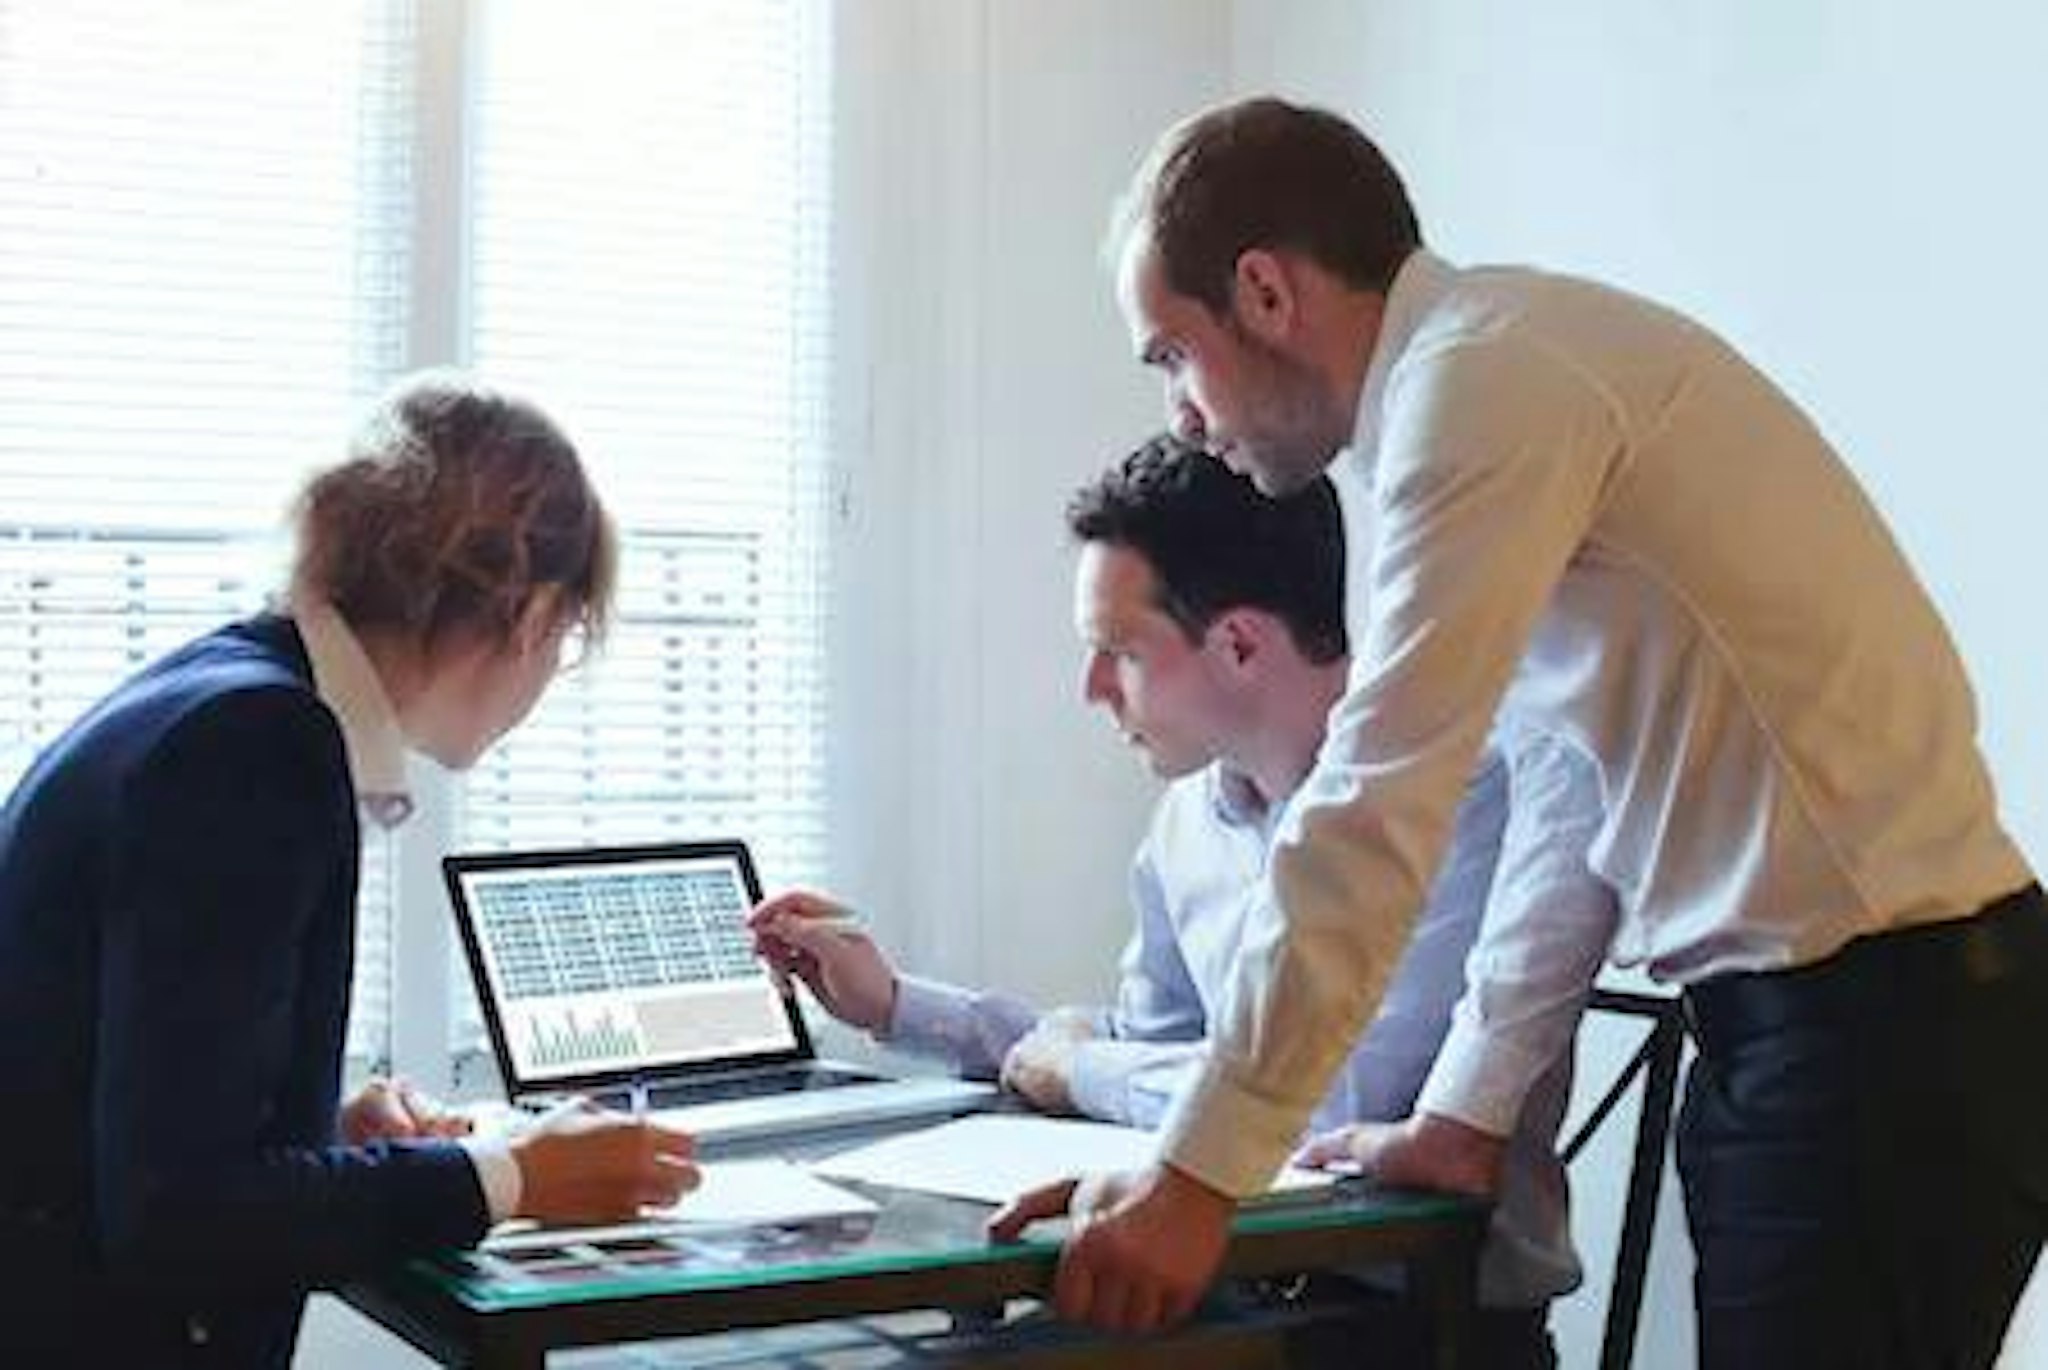 People surrounding a laptop to review the difference between purpose-built entity management software and Microsoft Excel